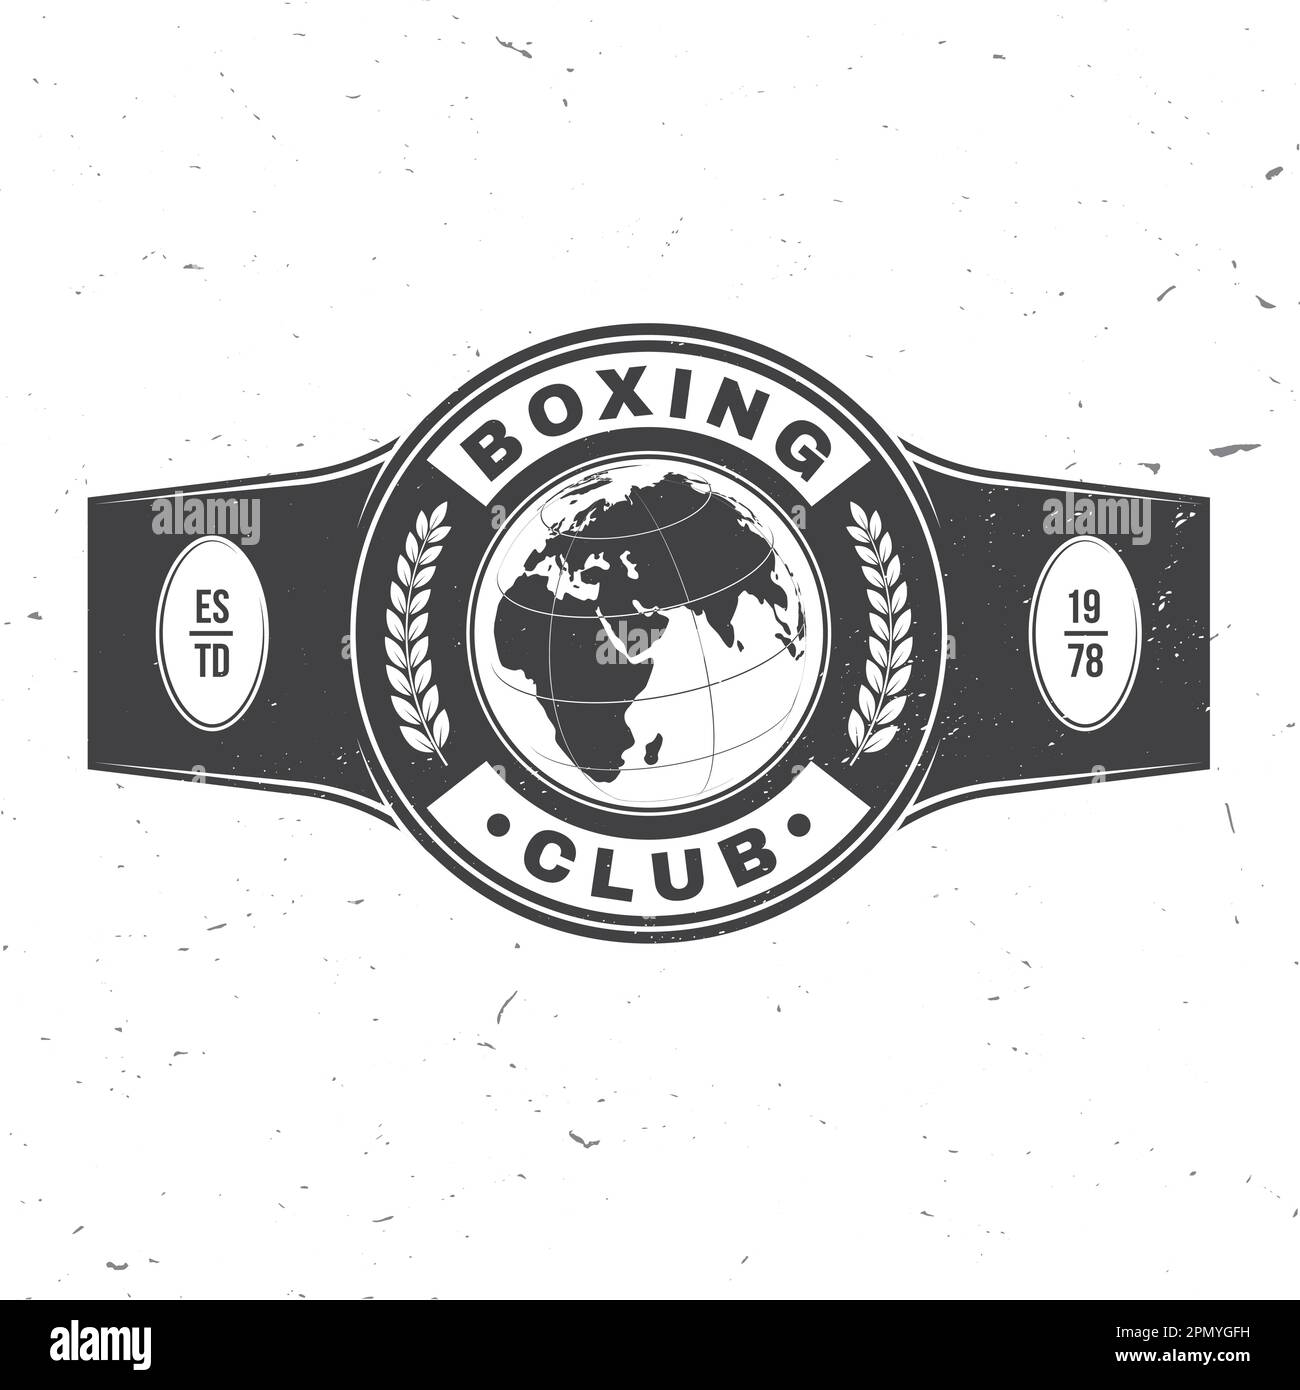 Boxing club badge, logo design. Hit like a girl. Vector illustration. For Boxing sport club emblem, sign, patch, shirt, template. Vintage monochrome Stock Vector